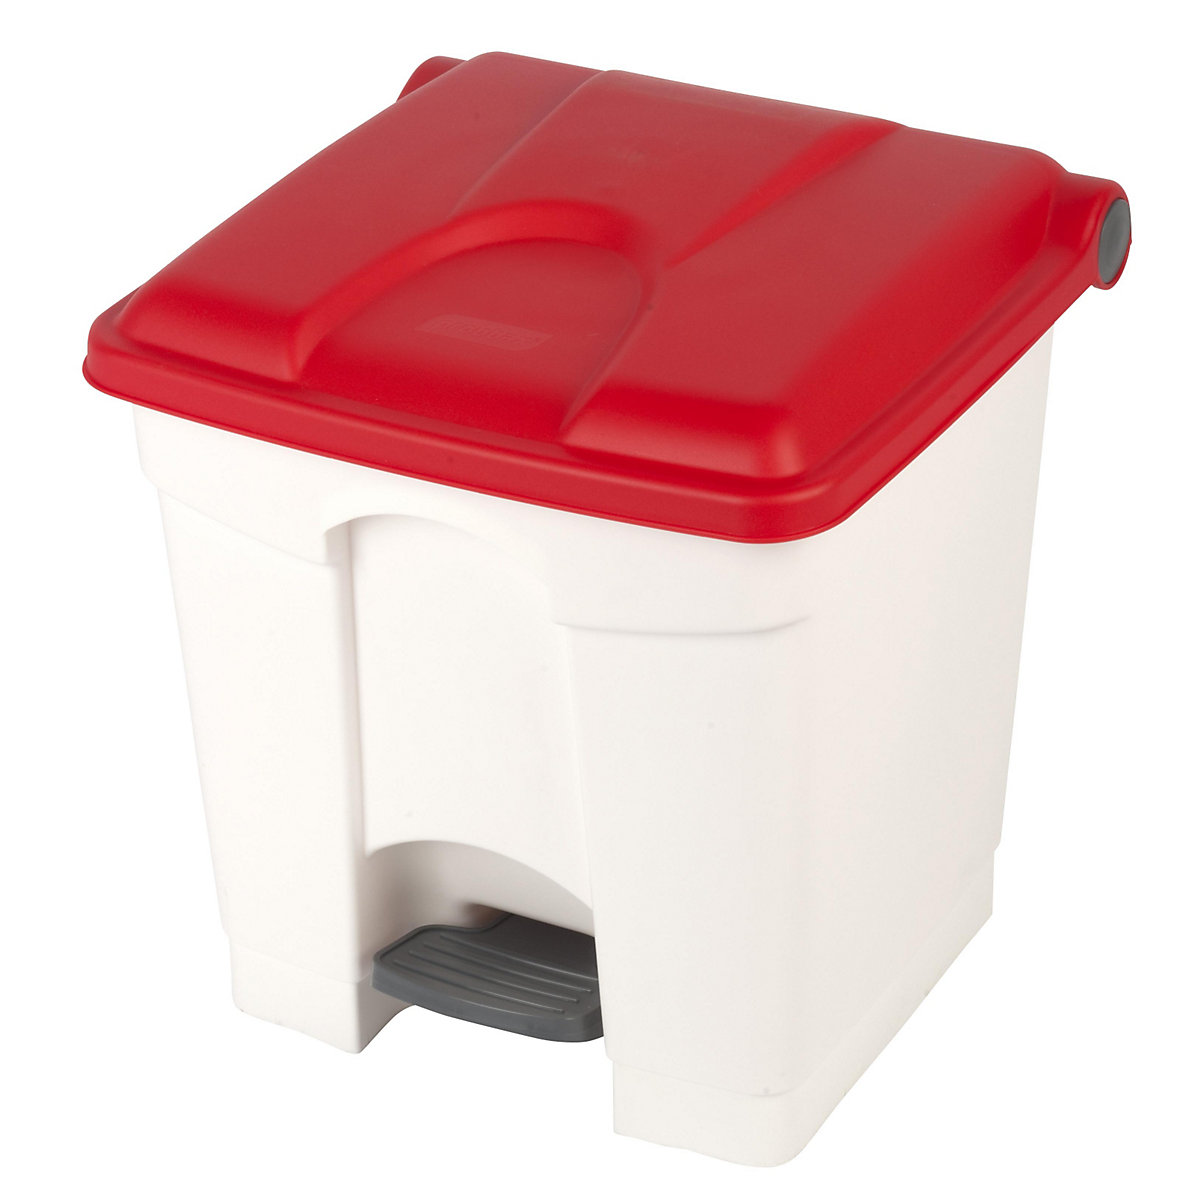 EUROKRAFTbasic – Pedal waste collector, capacity 30 l, WxHxD 410 x 435 x 400 mm, white, red lid